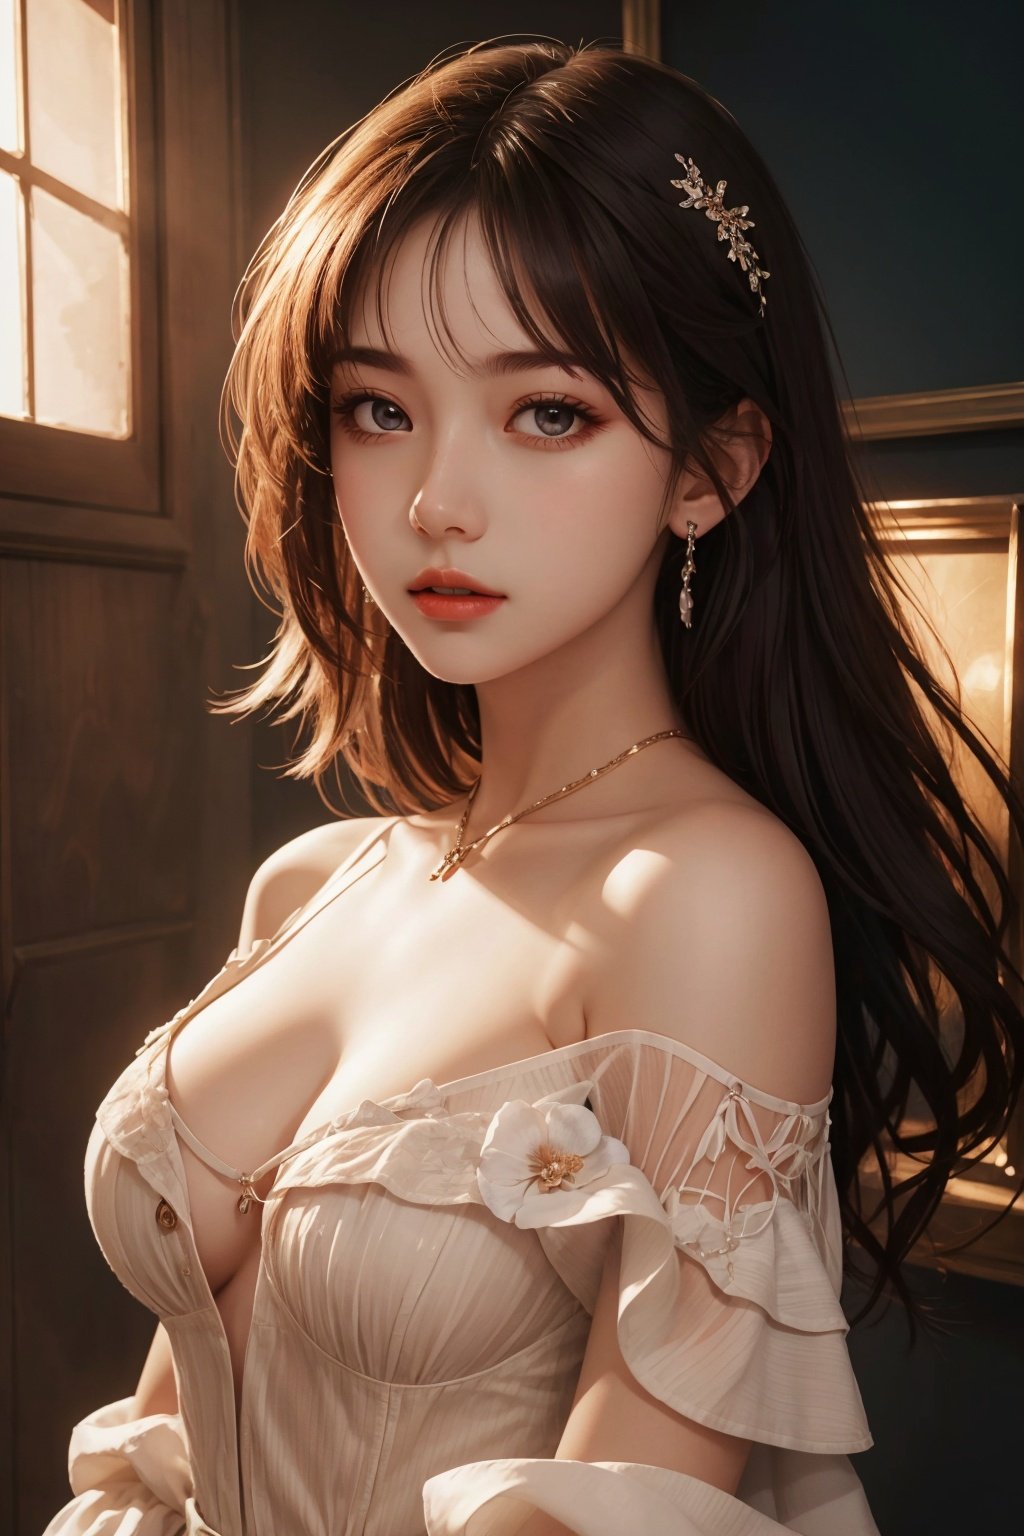  Beauty,best quality,super detail,fine detail,high resolution,8K wallpaper,perfect dynamic composition,beautiful detailed eye,suit,off-shoulder,cleavage, light master